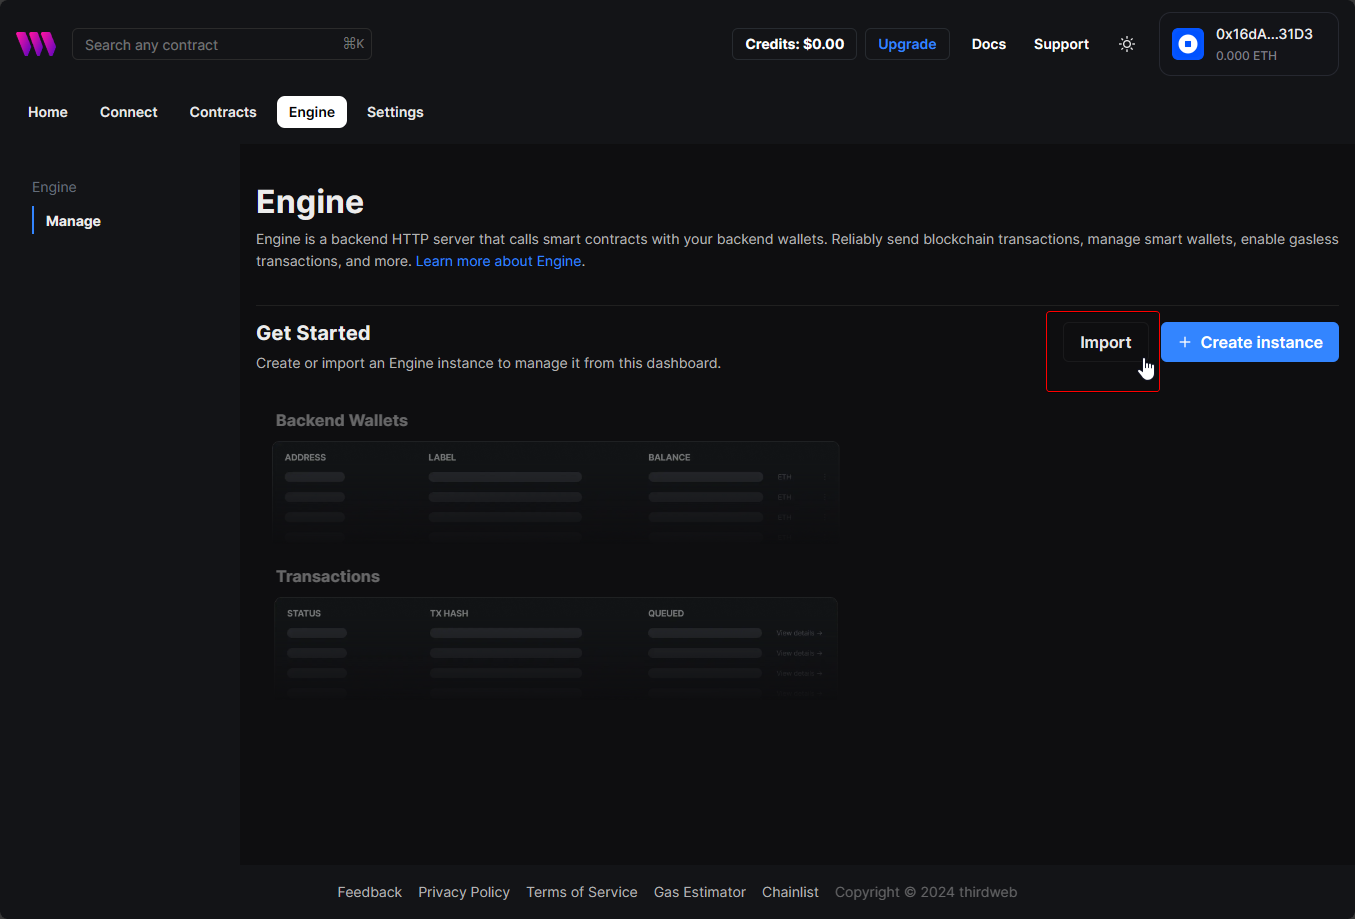 A screenshot of a thirdweb user interface for a blockchain-related service called "Engine," featuring navigation tabs, account information, and sections for managing backend wallets and transactions. The interface includes options to import or create an instance of an Engine.